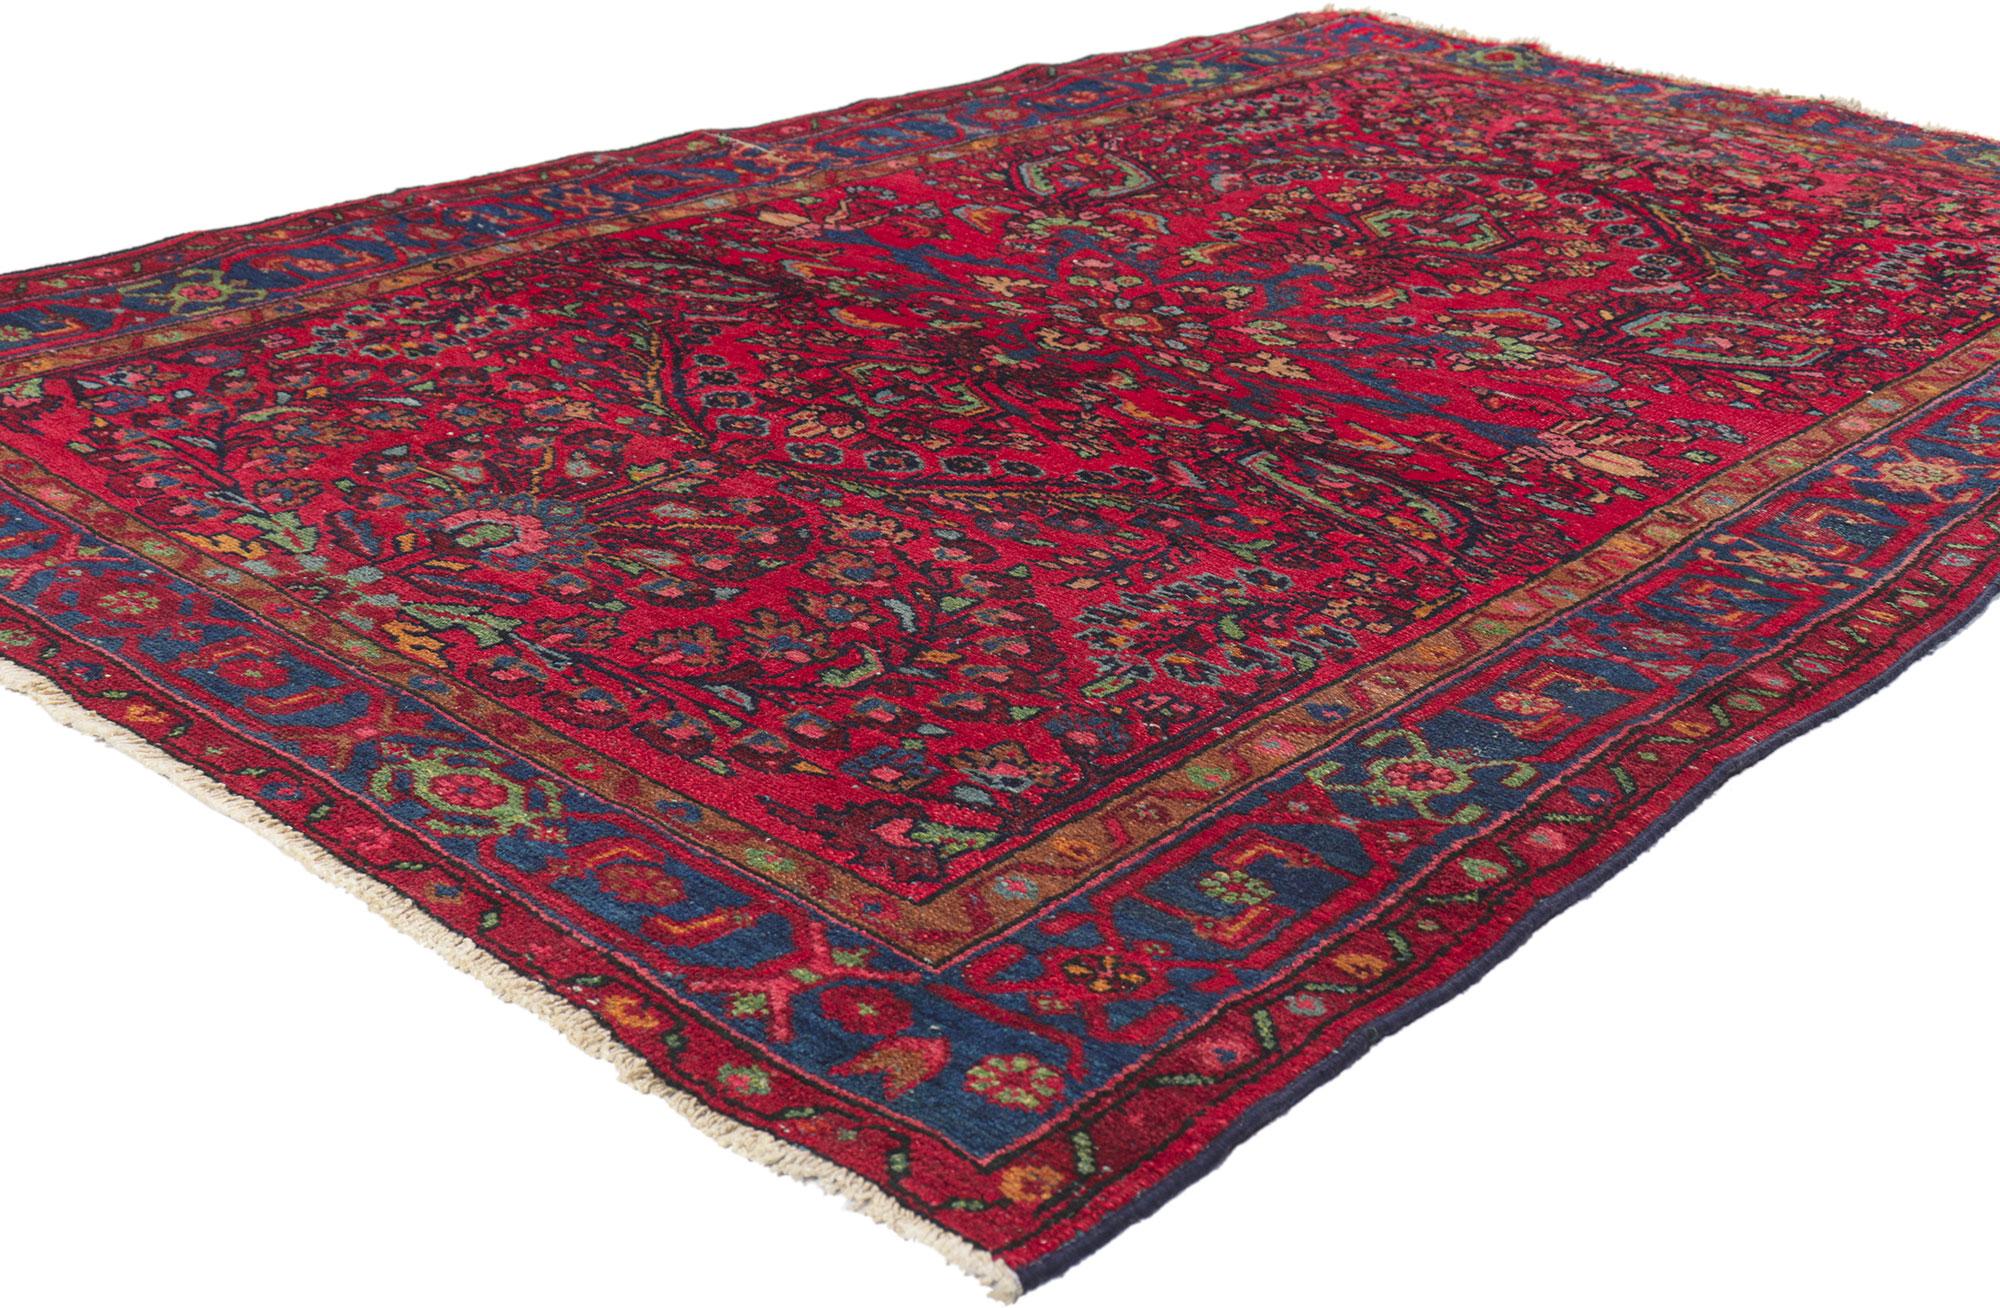 ?78453 Antique Persian Hamadan rug, 04'06 x 06'07.
With its timeless design, incredible detail and texture, this hand-knotted wool antique Persian Hamadan rug is poised to impress. The eye-catching stylized floral pattern and saturated color